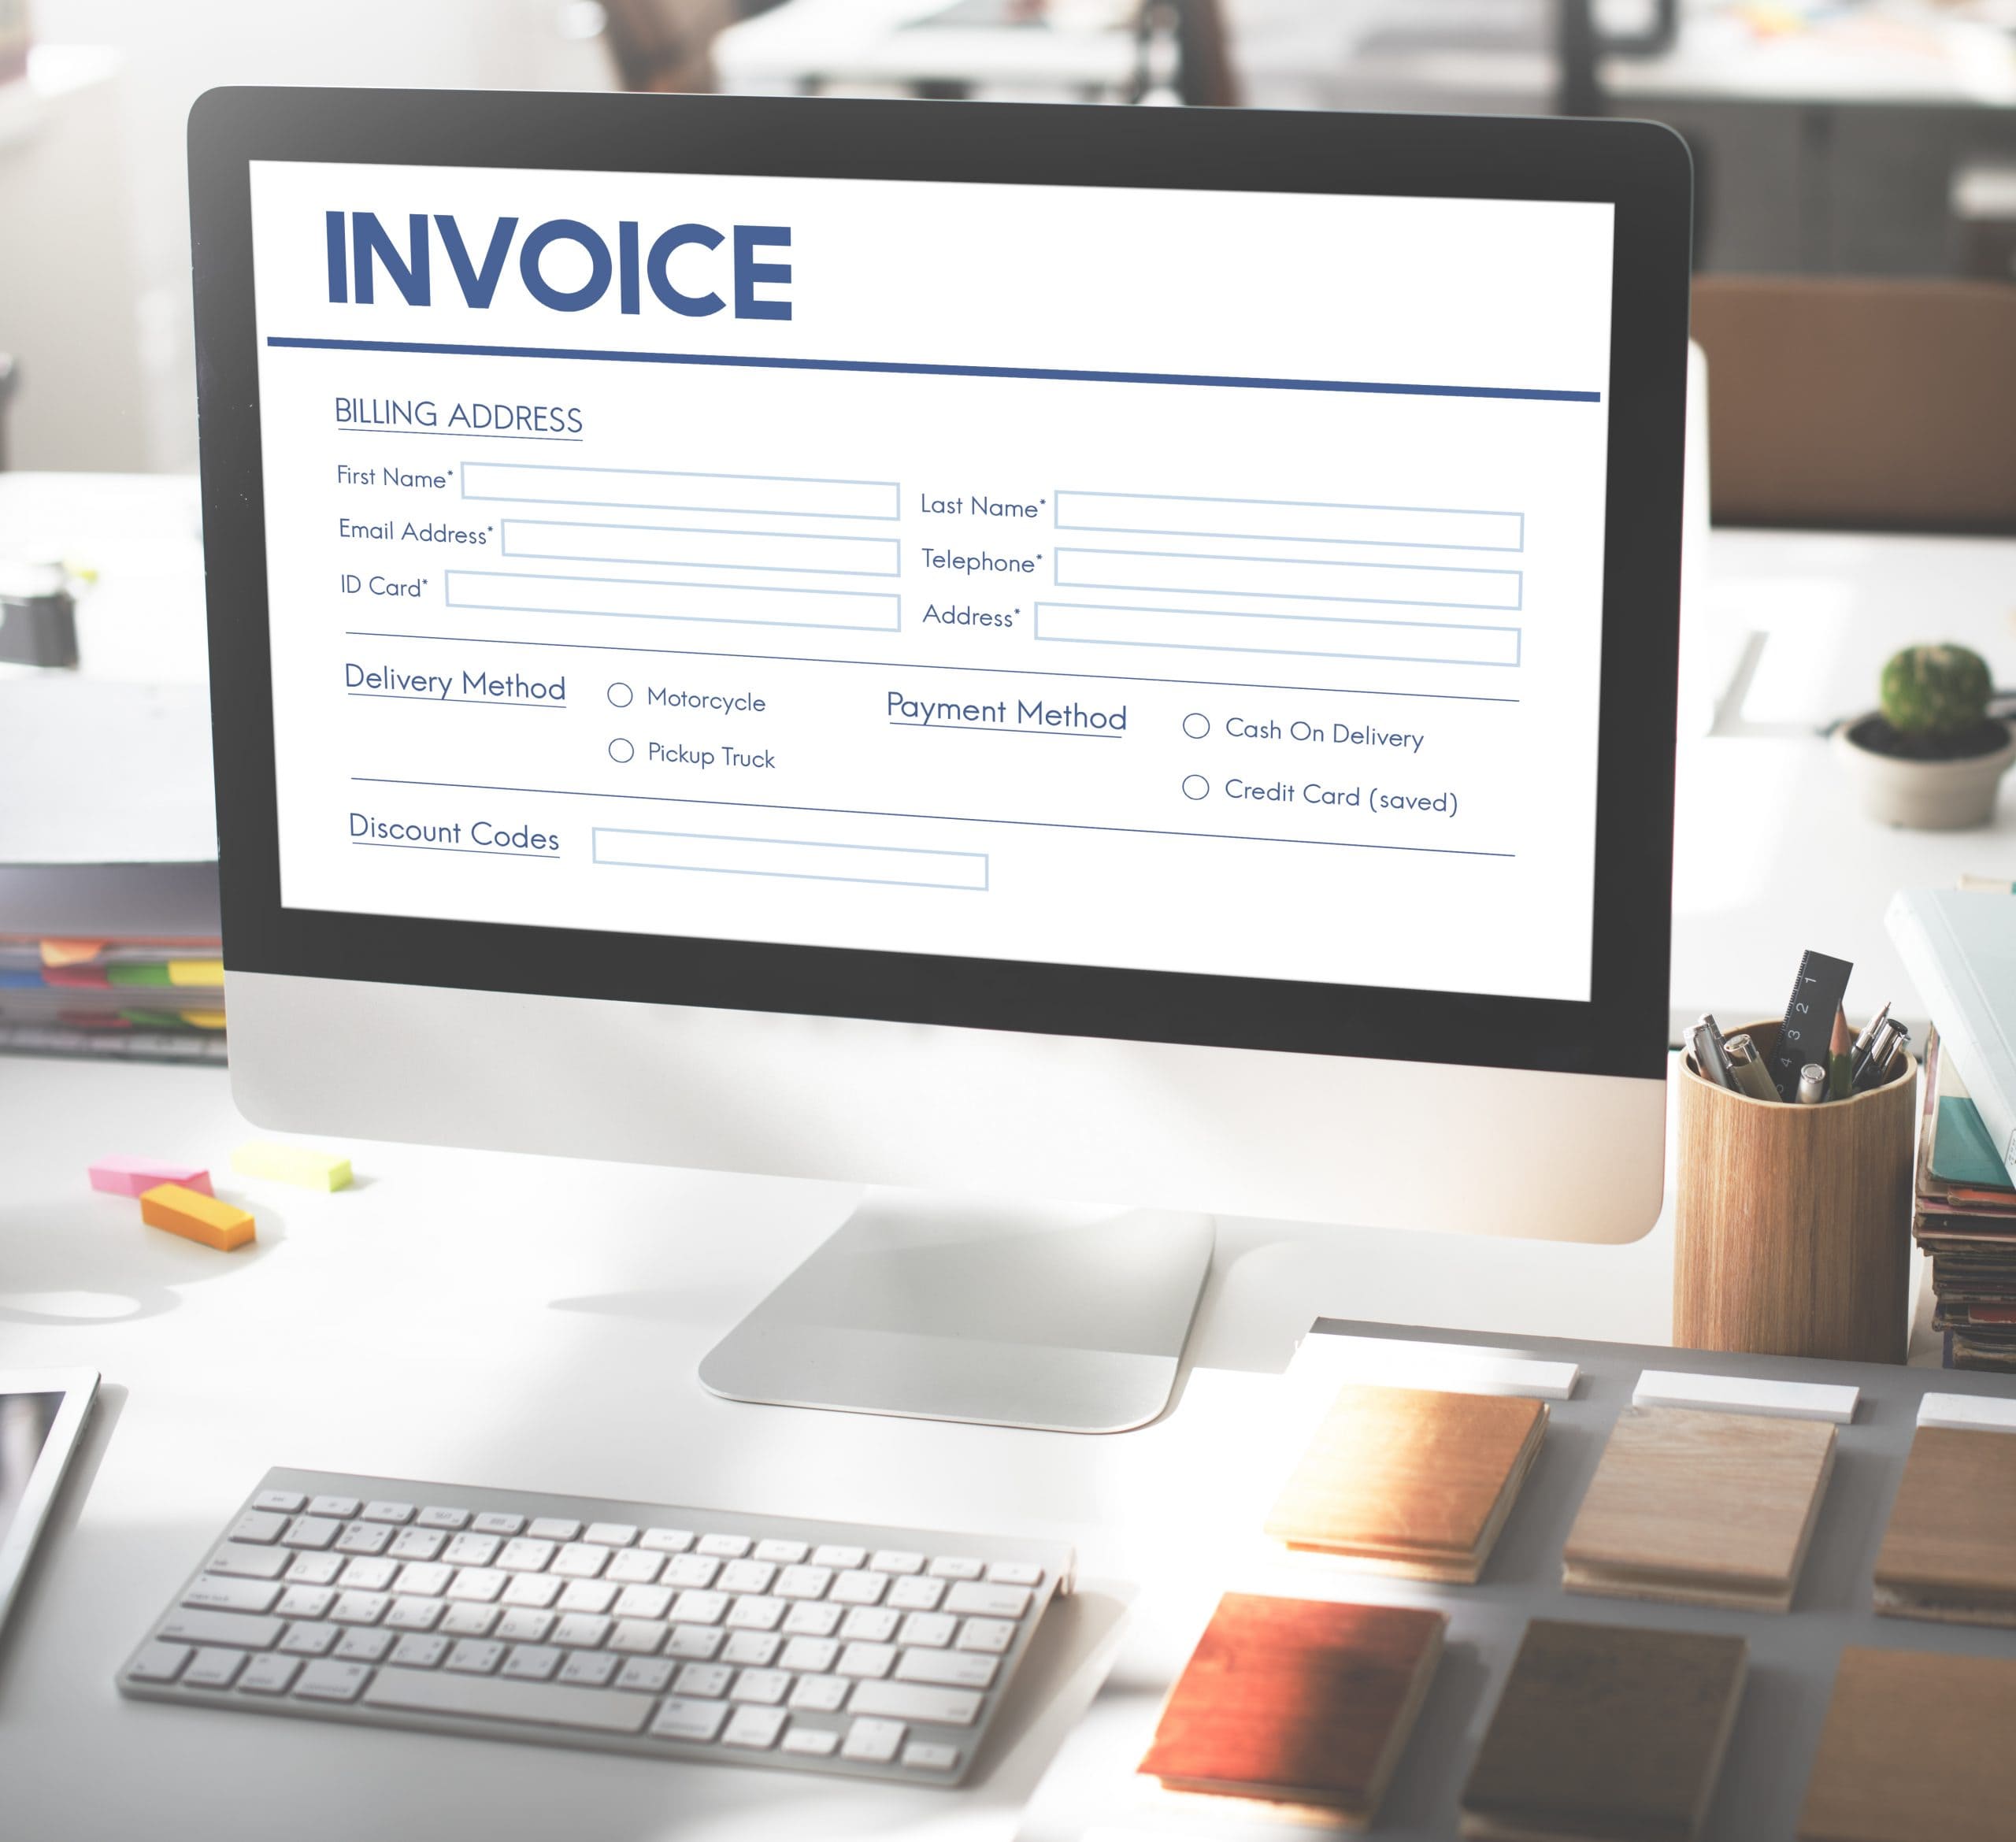 What Does “Due on Receipt” Mean on Invoices? (35)